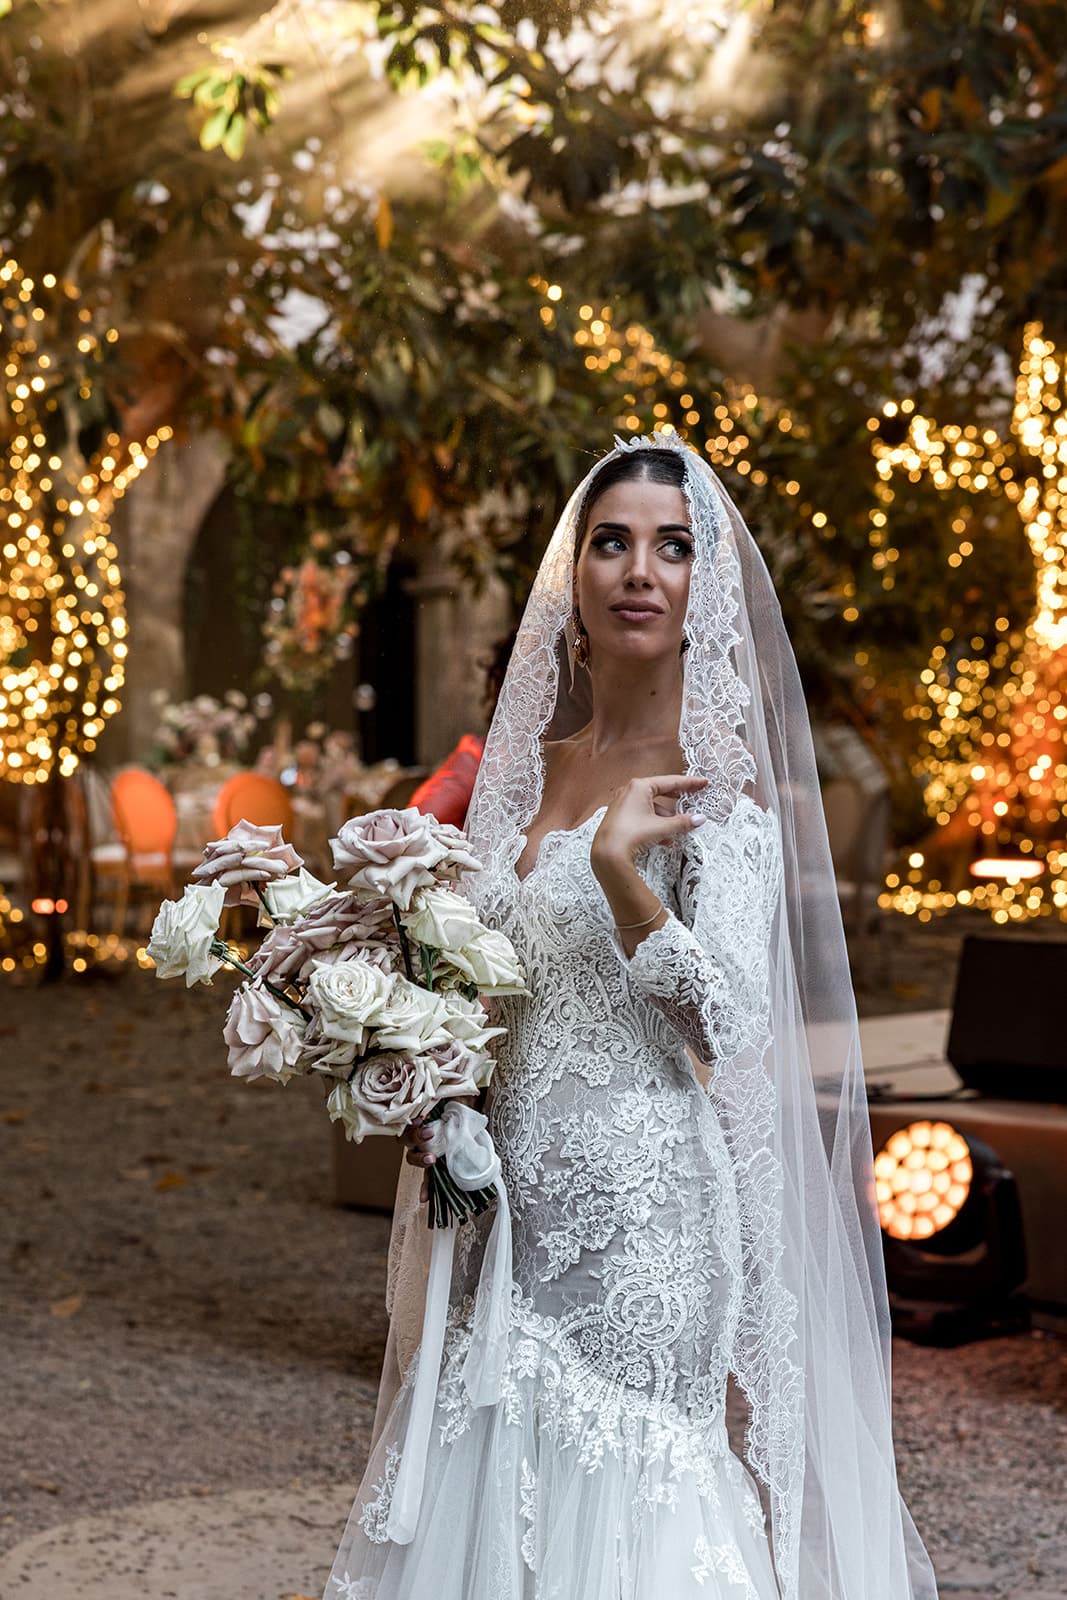 Bride wears classic bridal gown and veil at Sardinia wedding